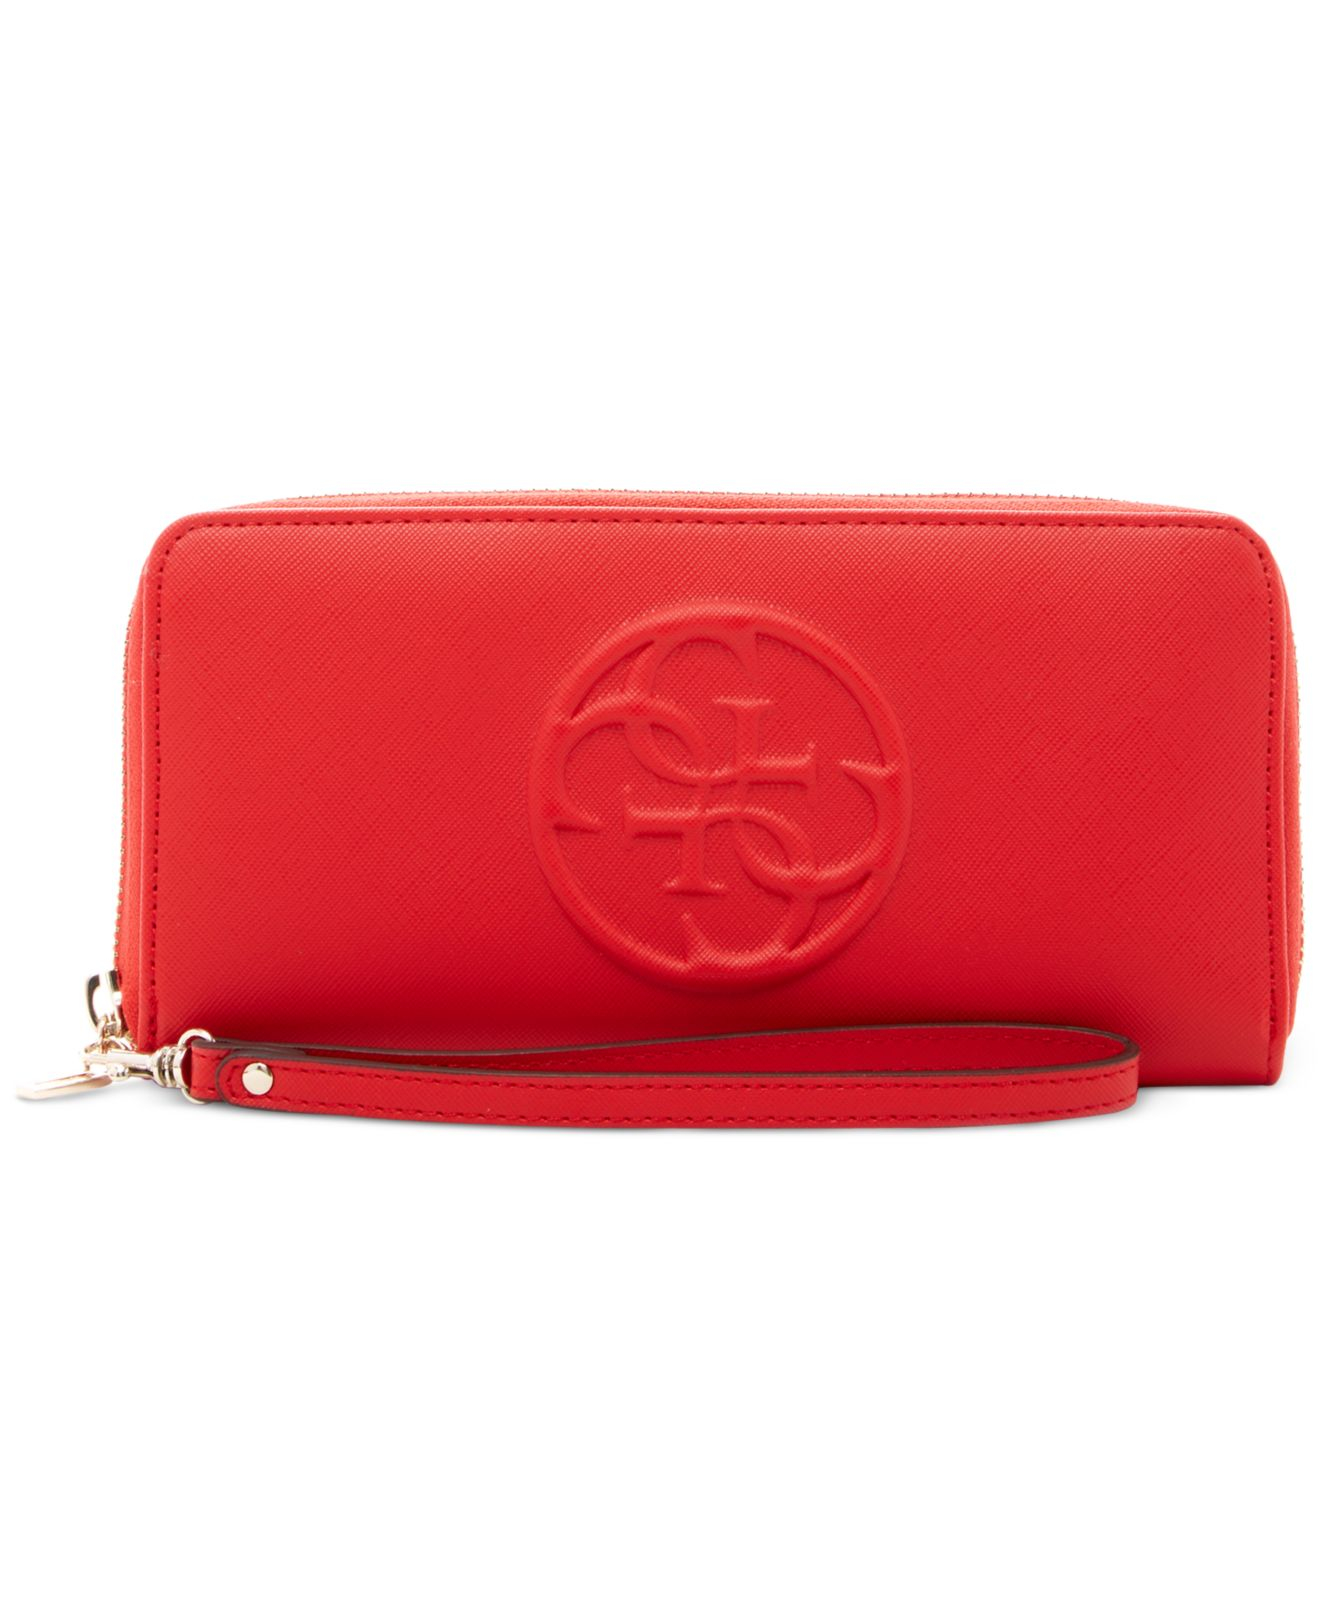 Guess Korry Large Zip Around Wallet in Red | Lyst